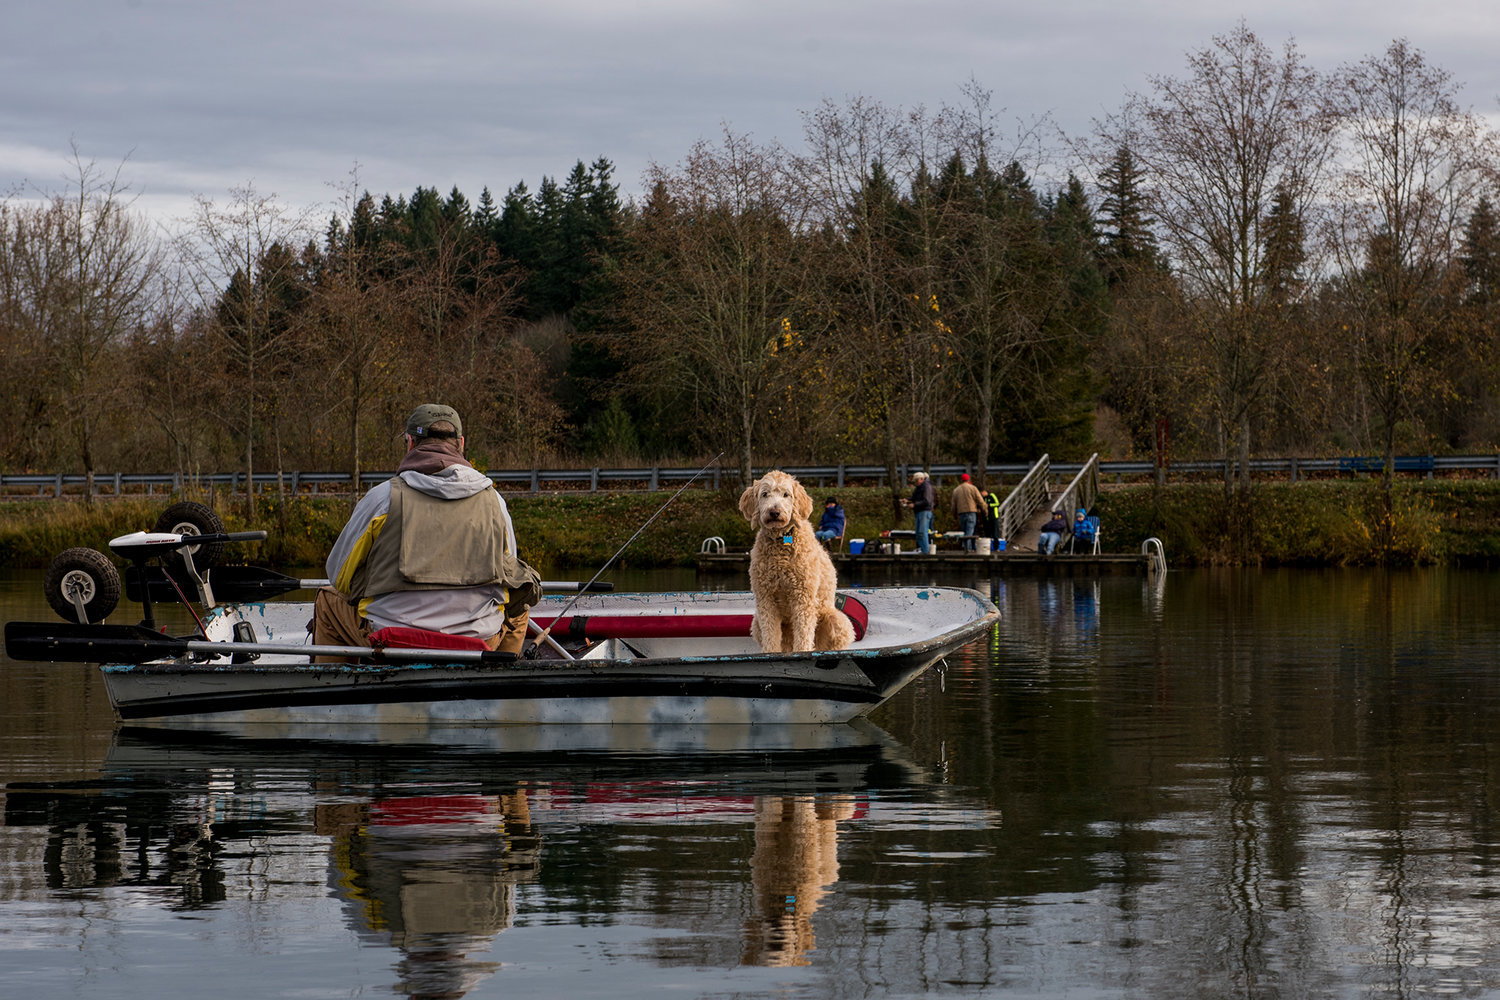 John Stotka keeps an eye on his fishing pole while his fishing partner, Penny the Dog, watches out for ducks in this 2017 Chronicle file photo.